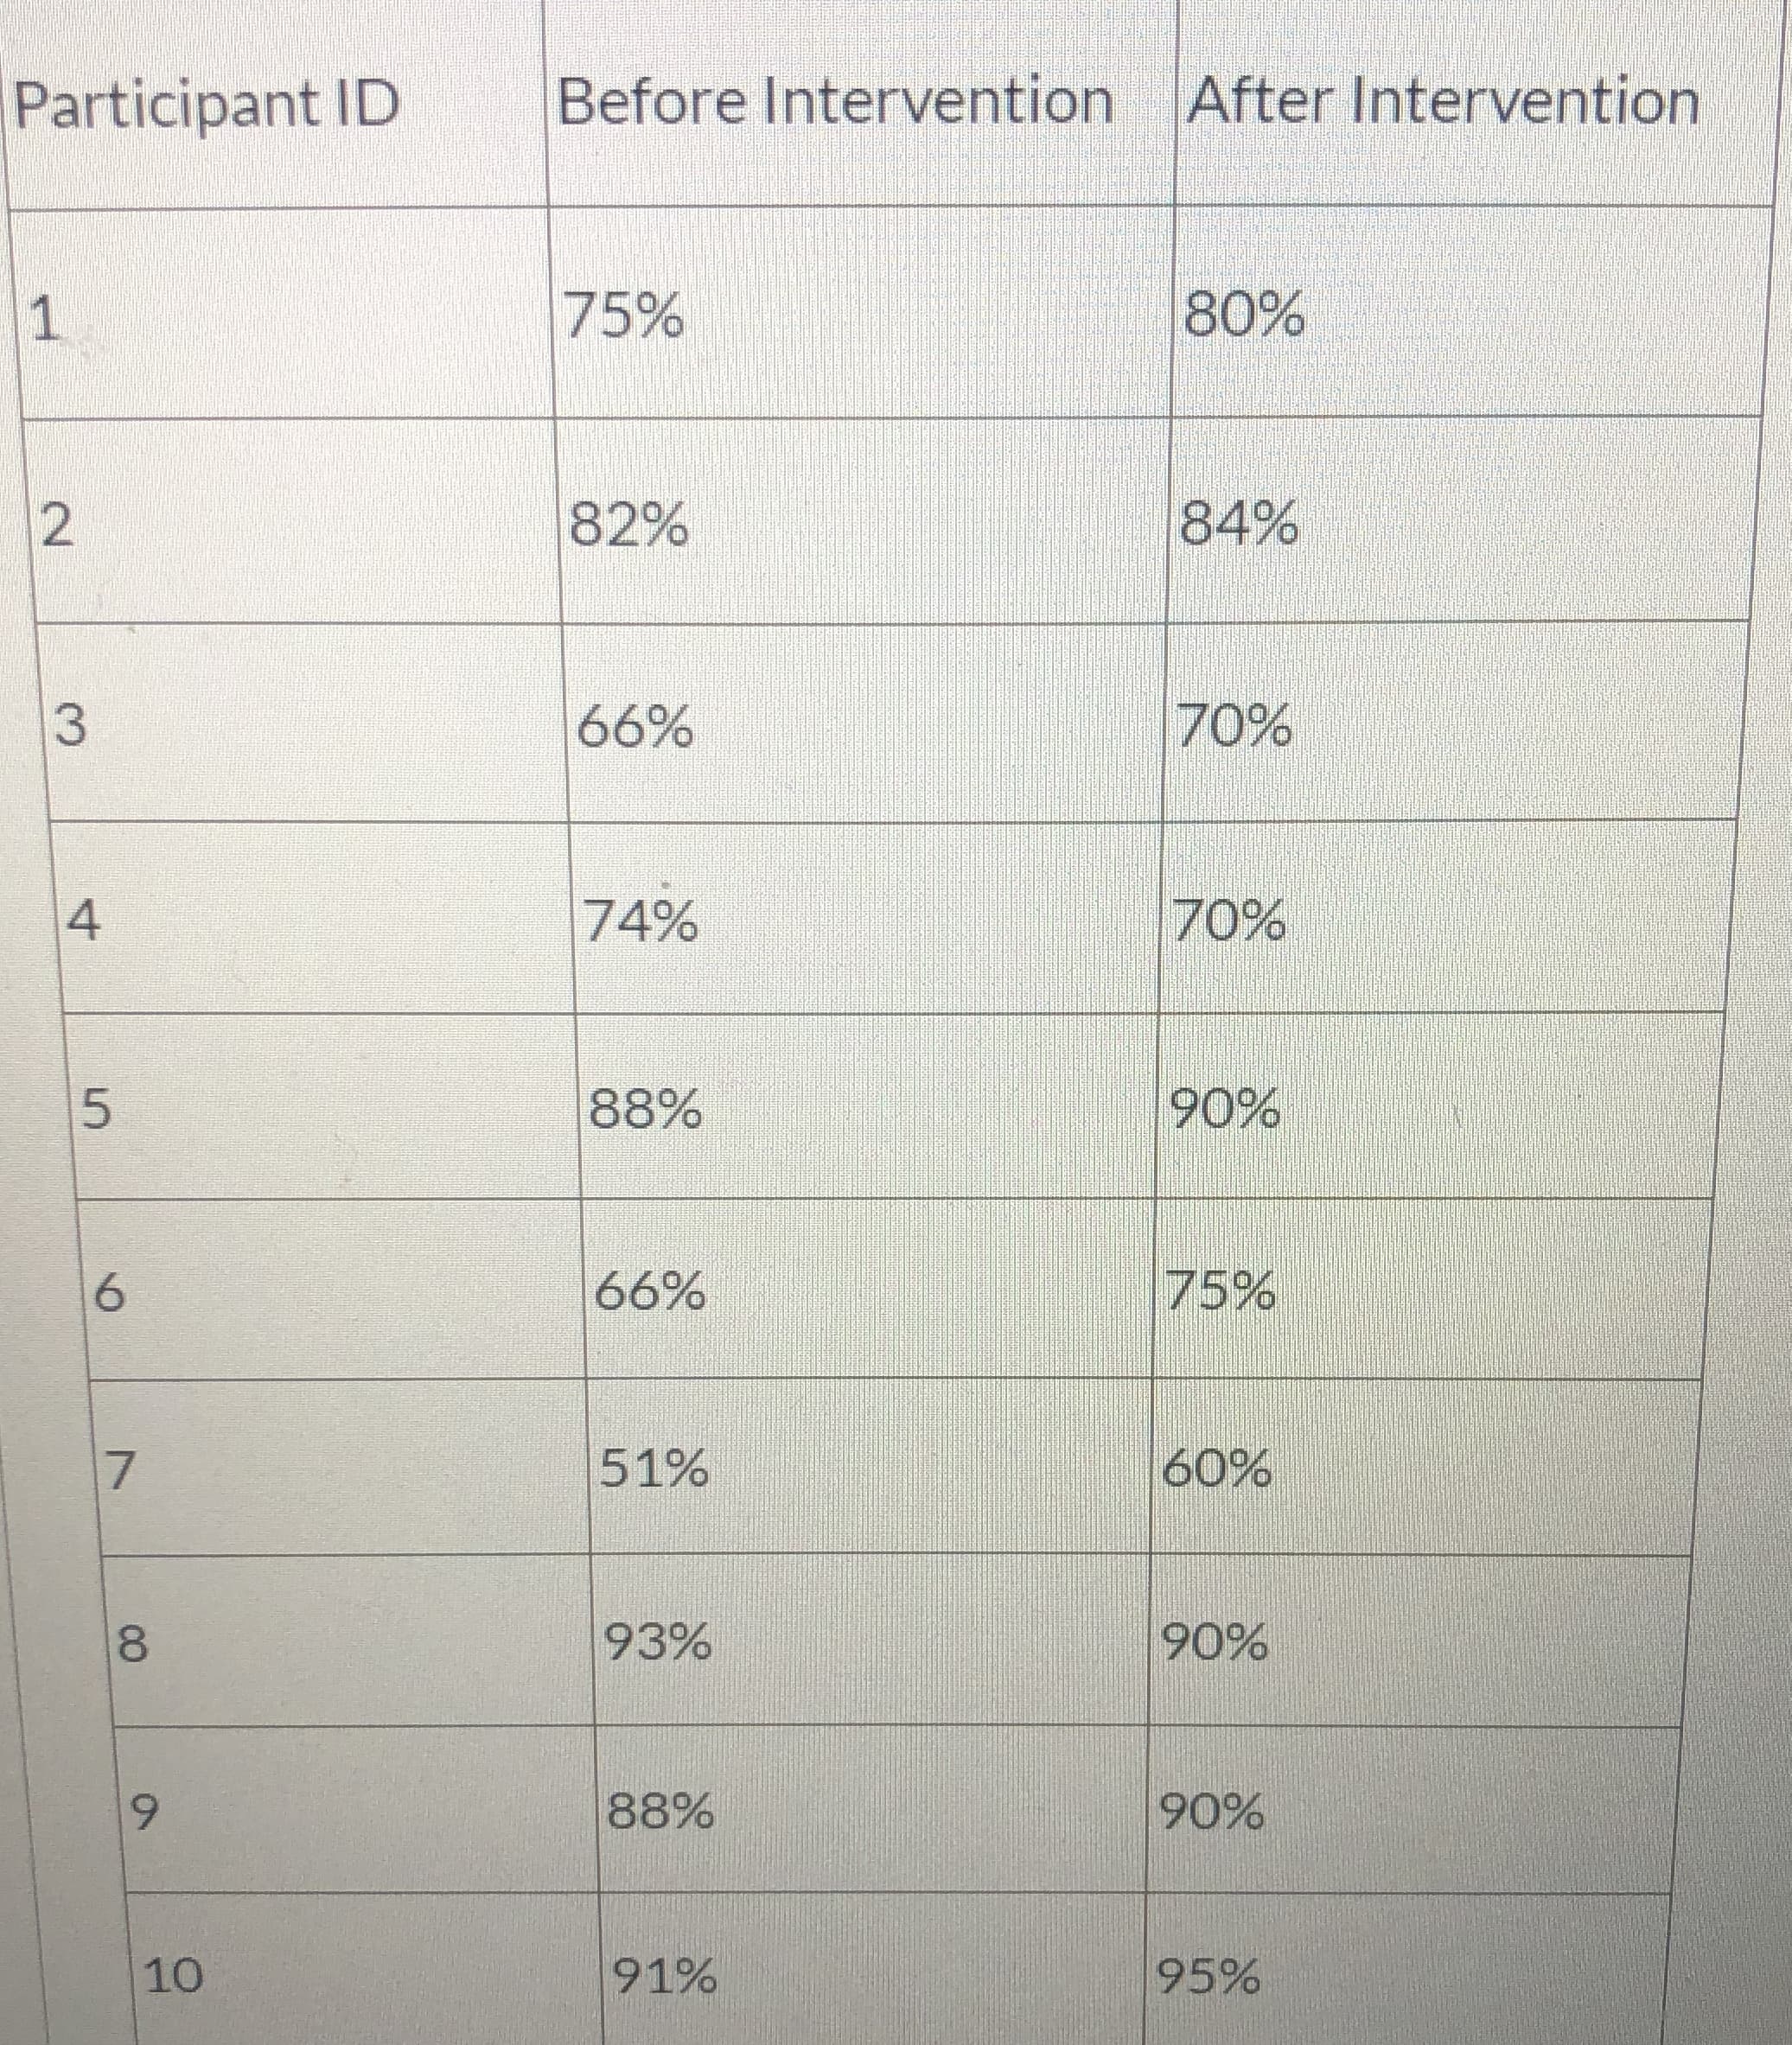 After Intervention
Before Intervention
Participant ID
80%
75%
84%
2
82%
3
70%
66%
70%
4
74%
88%
90%
5
75%
66%
6
51%
60%
90%
93%
88%
90%
9
91%
10
95%
7
CO
